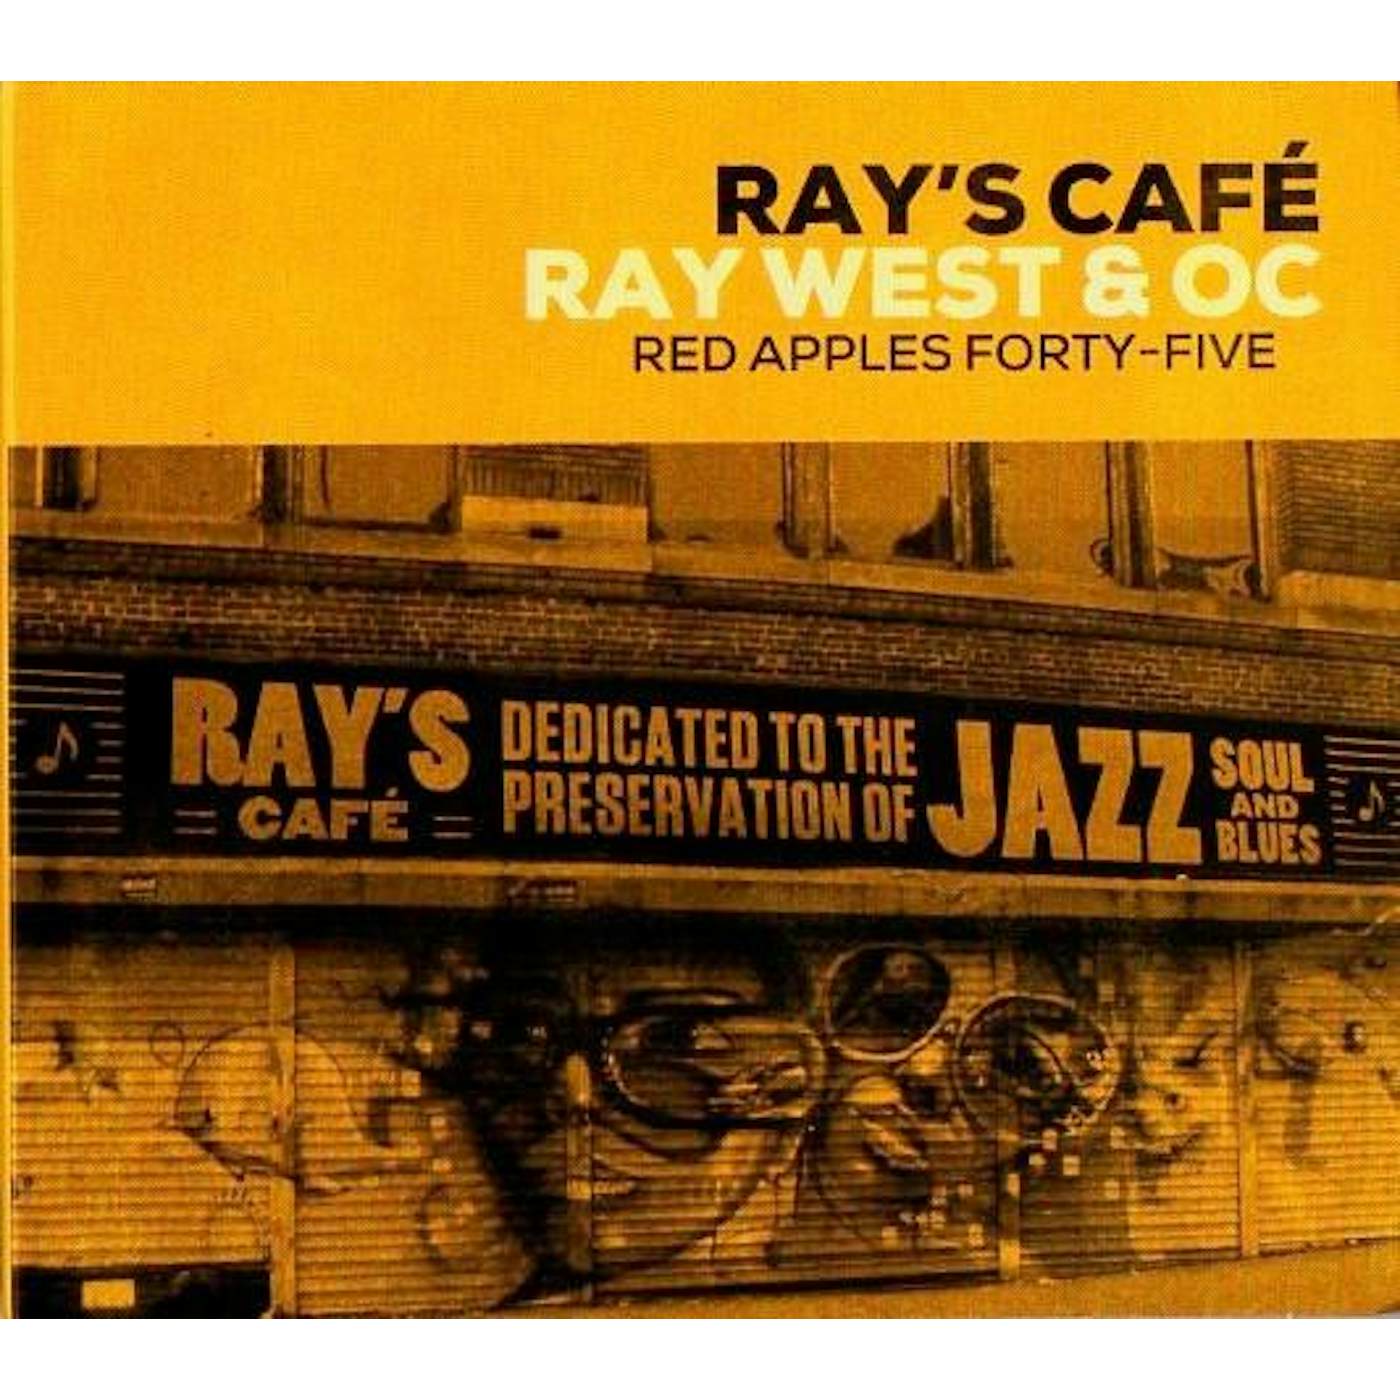 Ray West & Oc RAY'S CAFE DELUXE EDITION CD